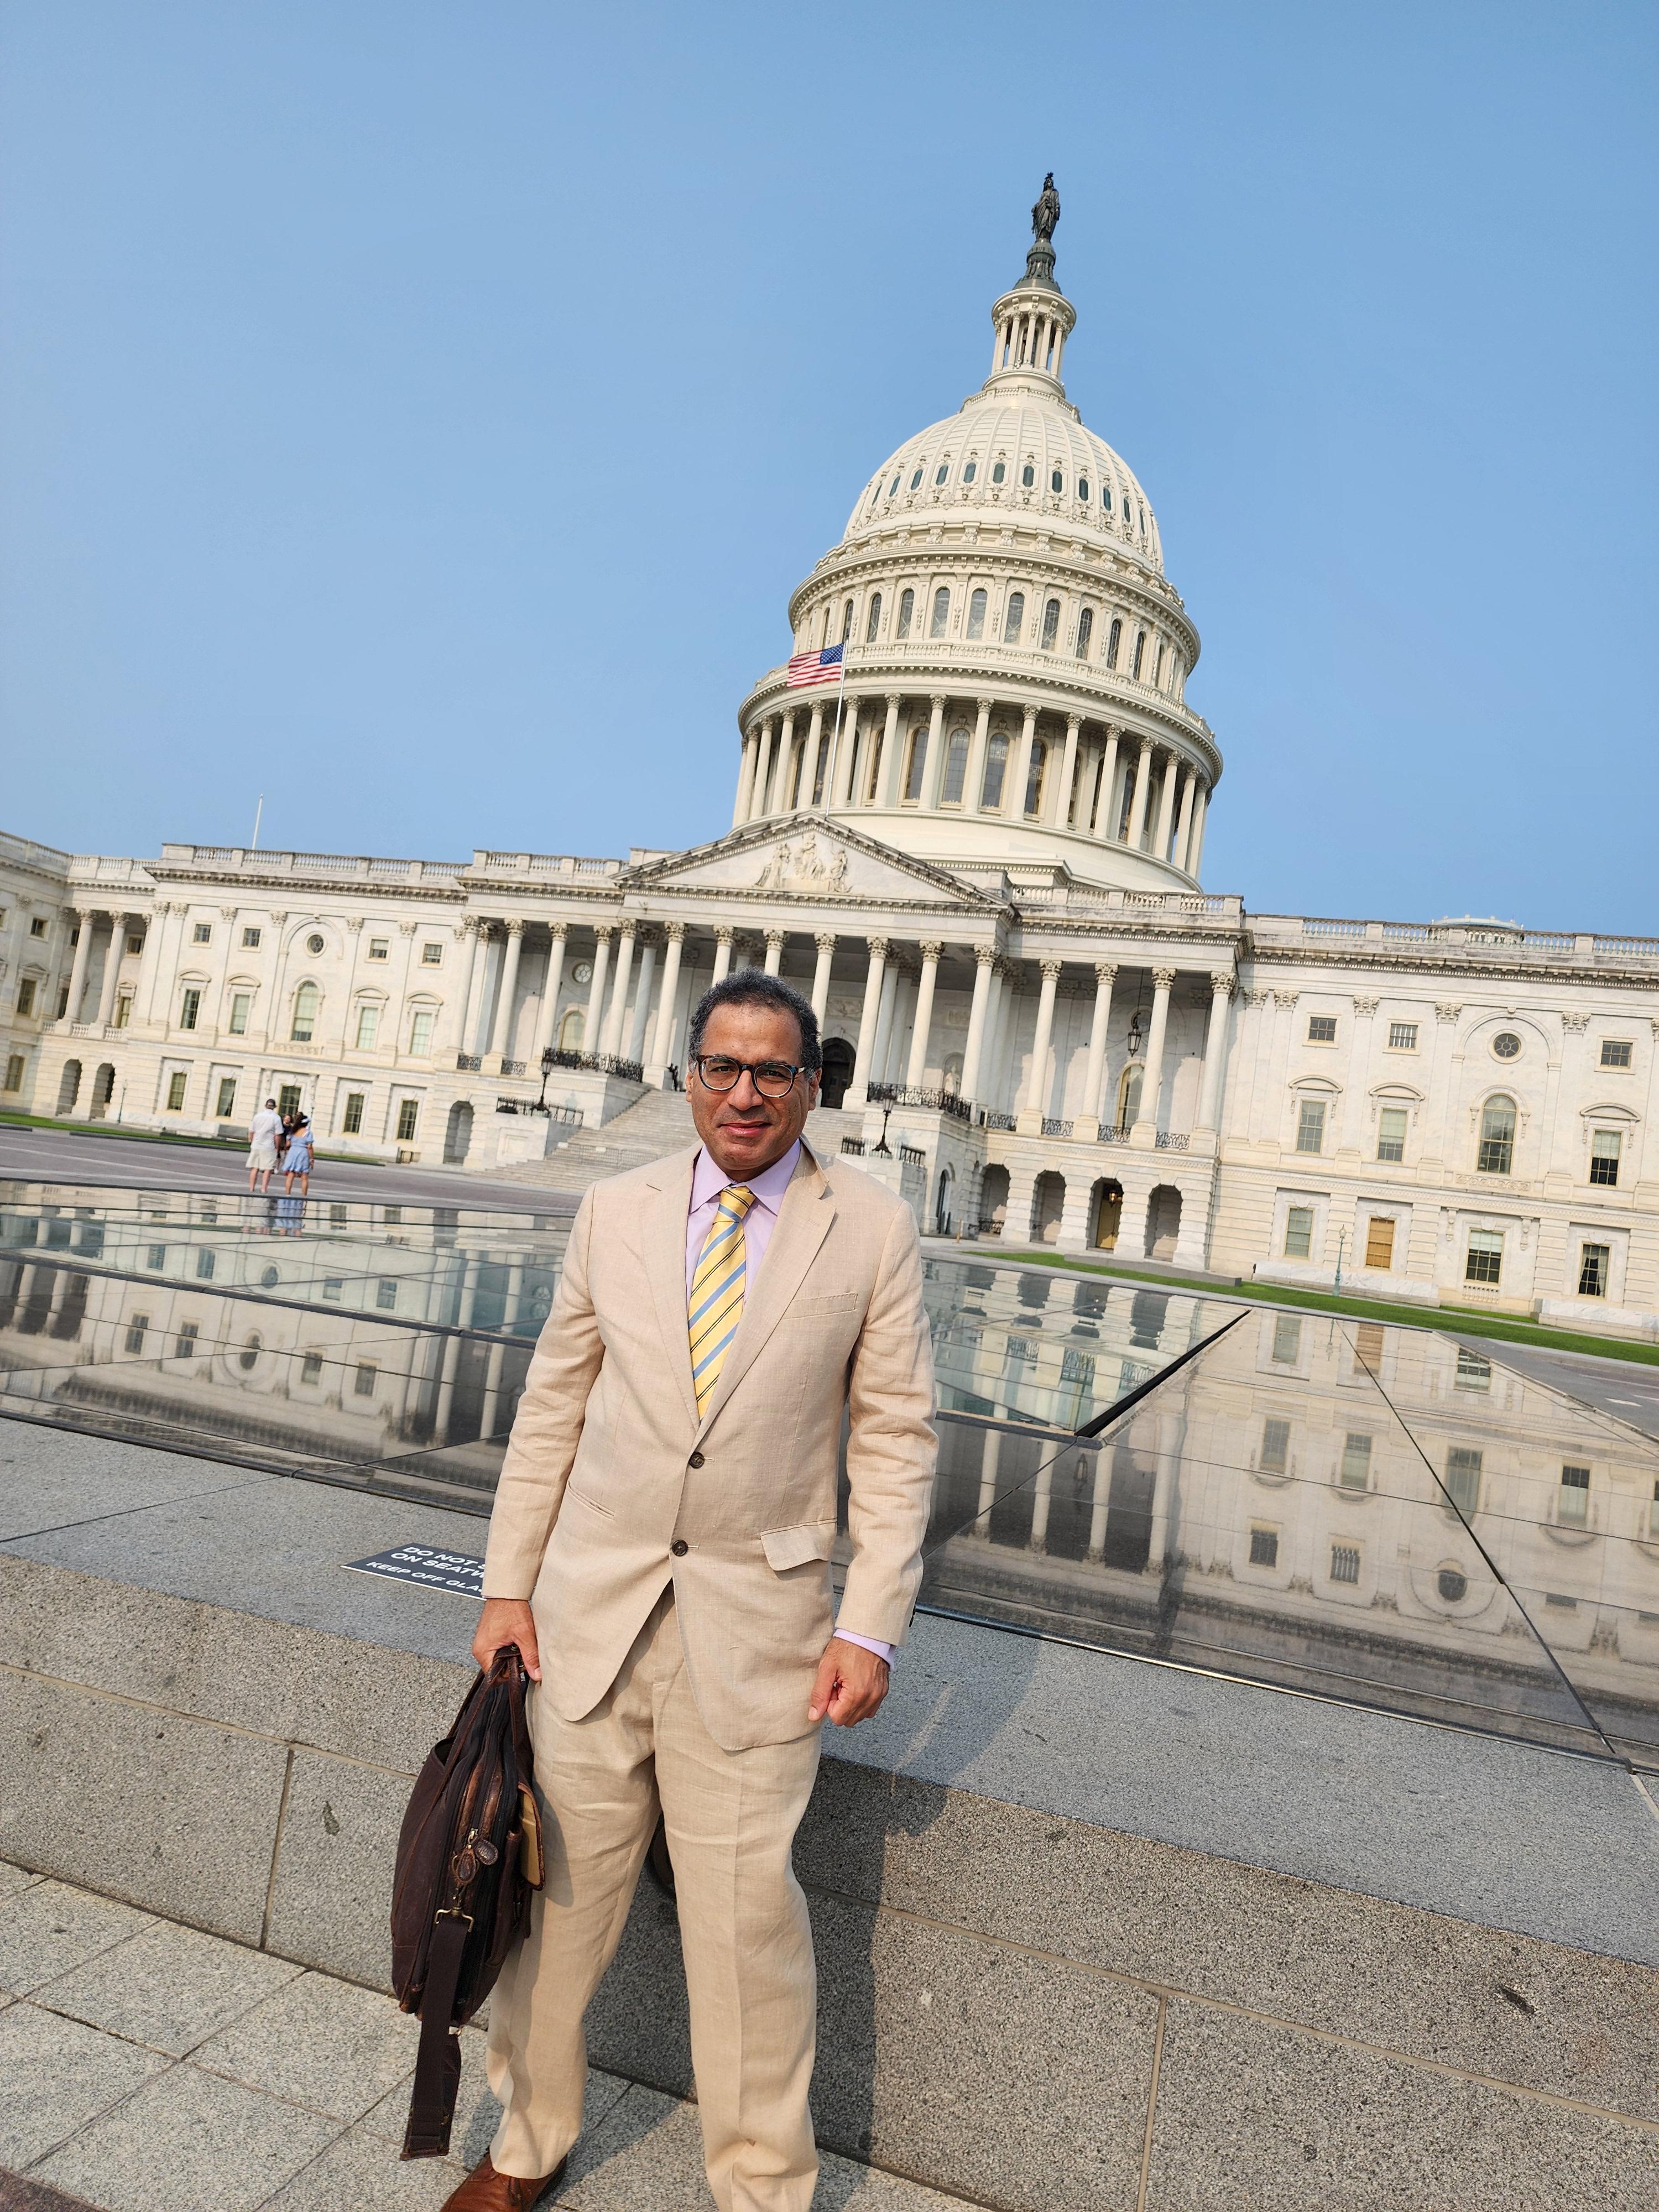 Marc, a light skinned Black man, standing in front of the United States Capitol Building in Washington, D.C. He is dressed formally in a beige suit with a white shirt and a yellow-striped tie. He is wearing glasses and has short dark hair. He is holding a dark brown leather bag in his left hand and is standing on what appears to be a reflective surface, as the Capitol building is partially reflected in front of him. 